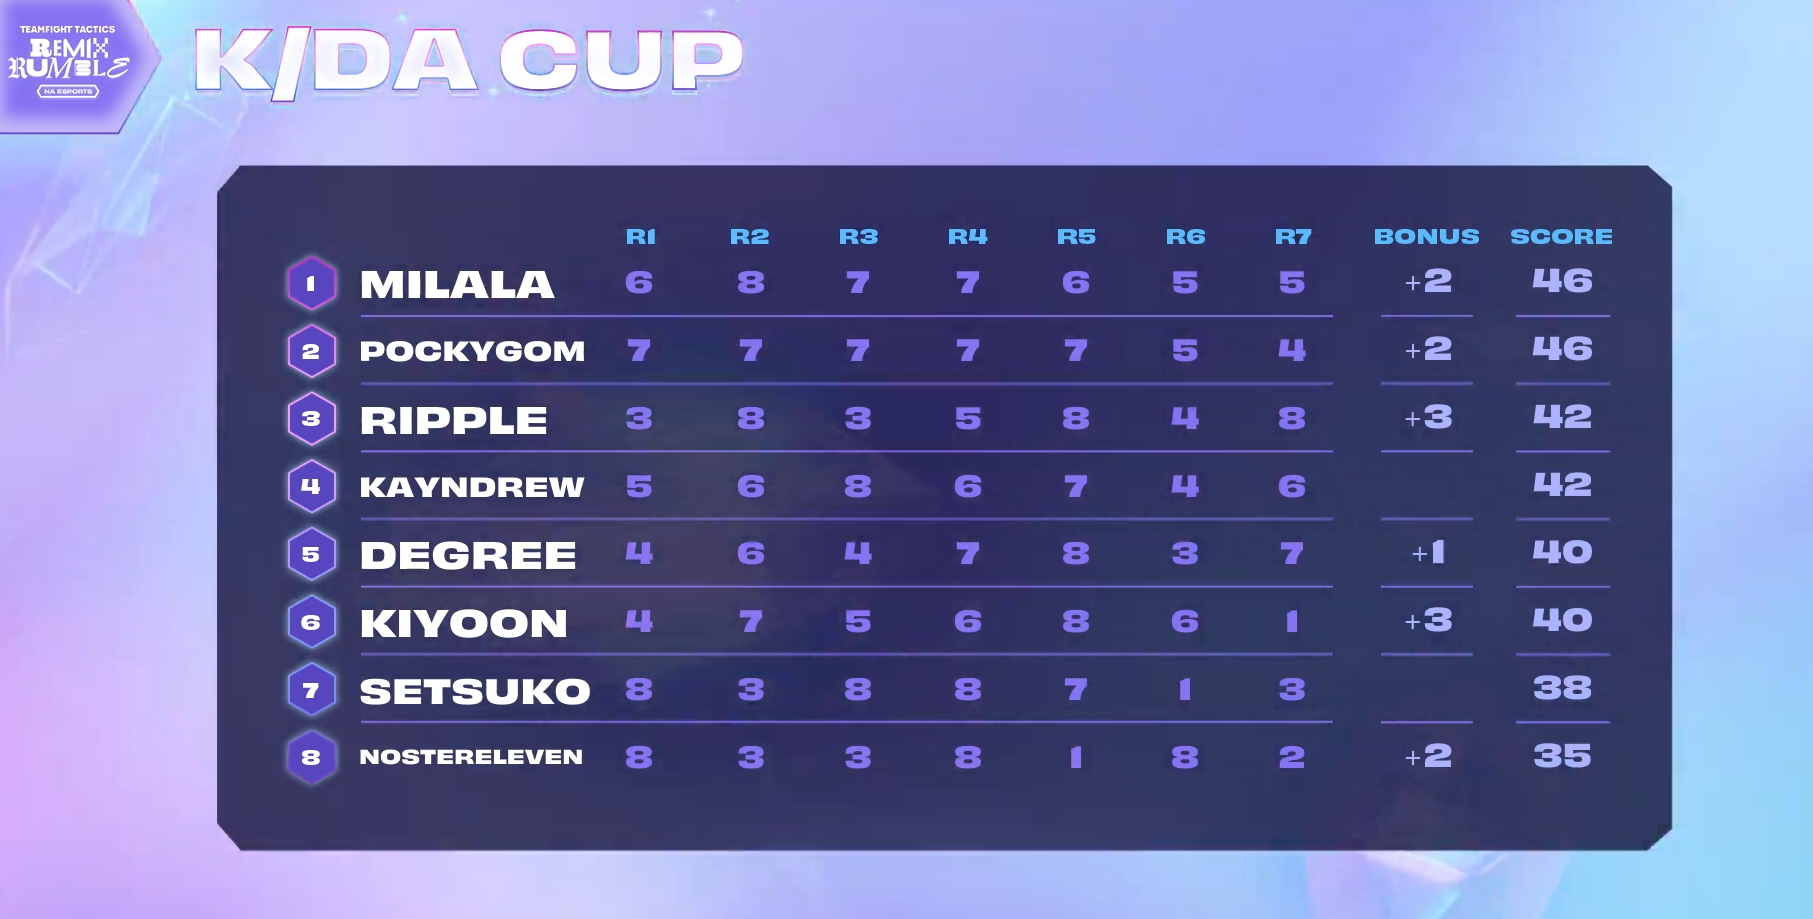 K/DA Cup overall standings top eight